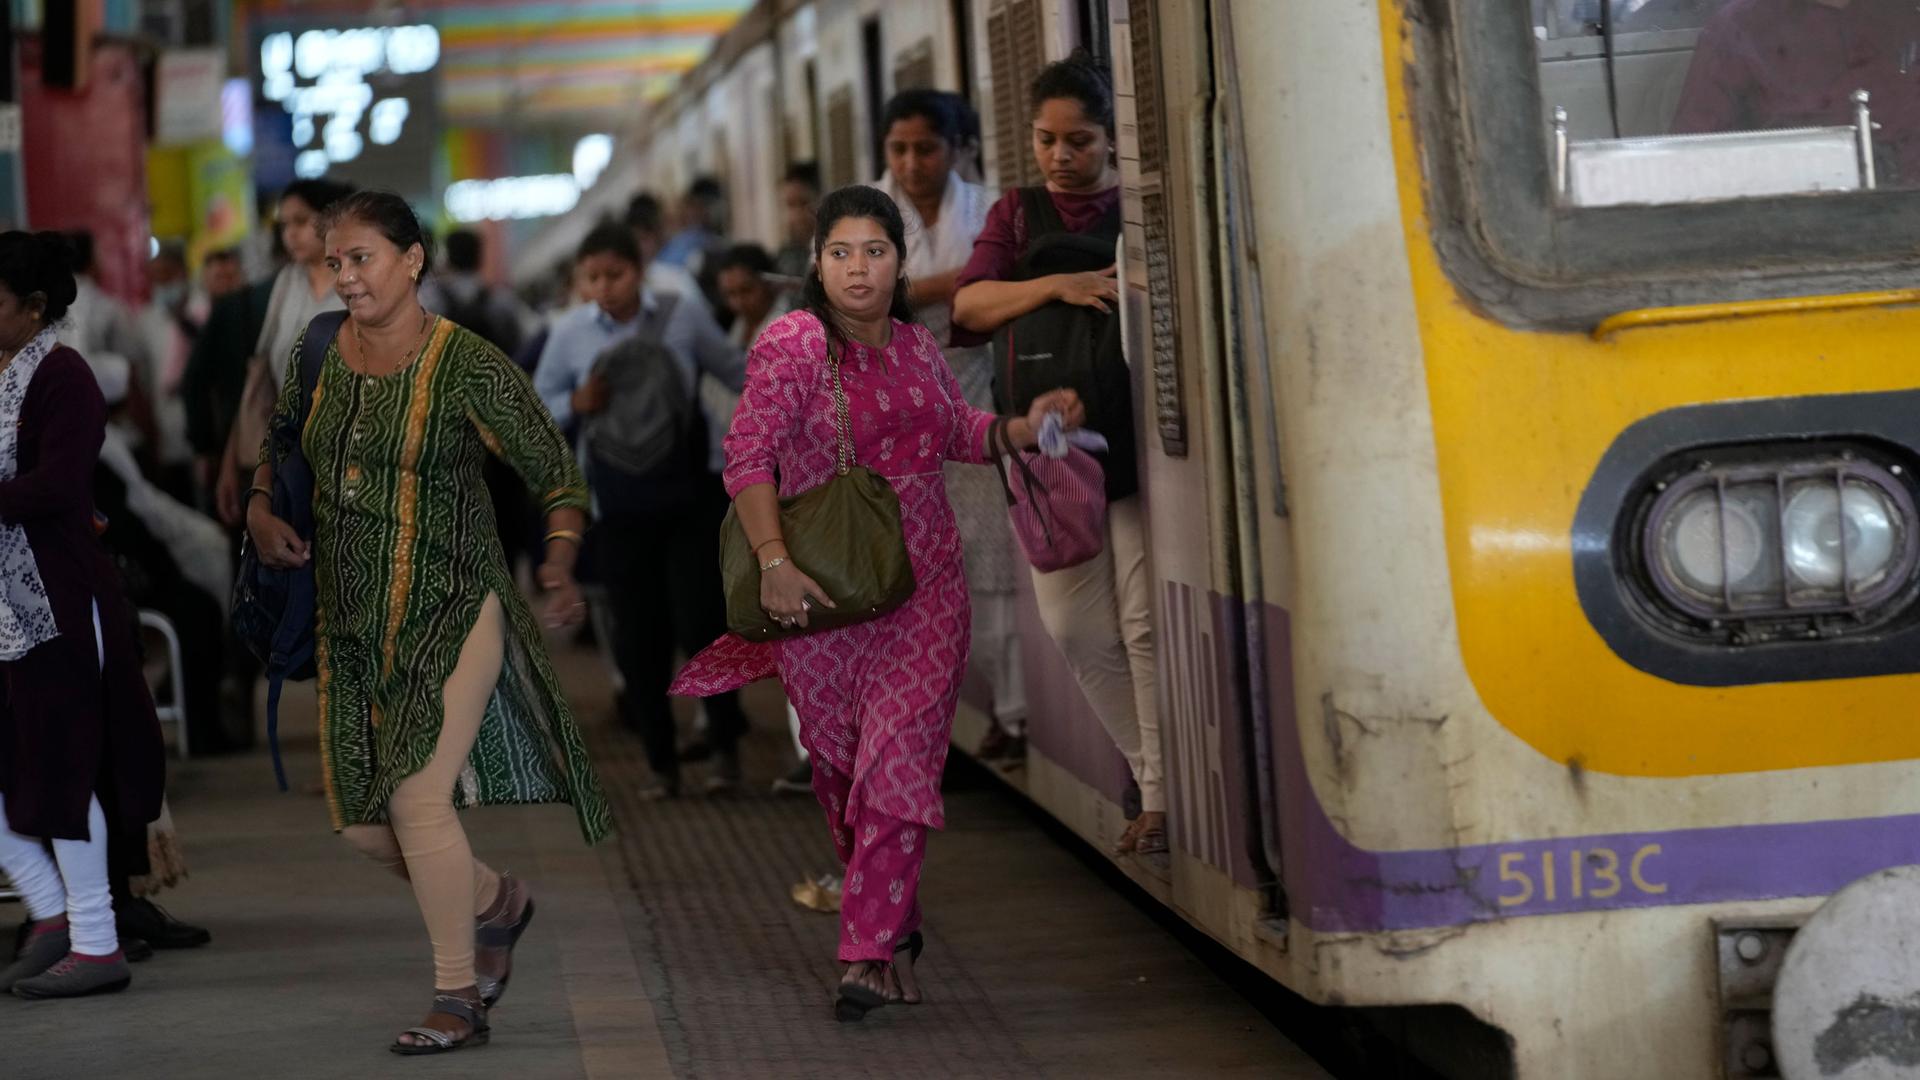 Indian women do less paid work. It’s bad news for the economy.